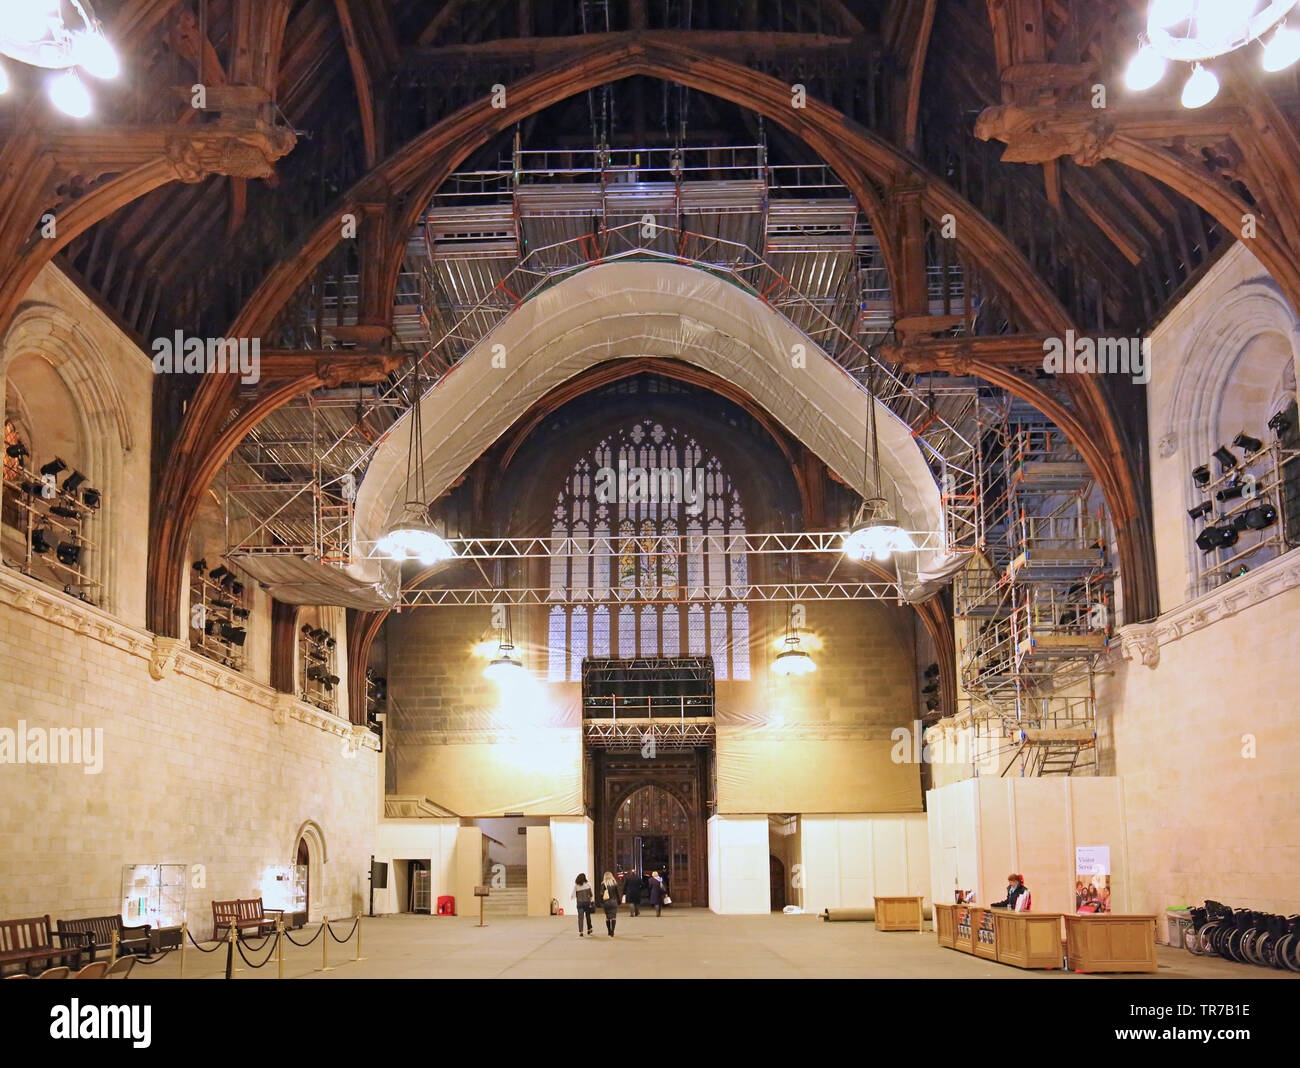 Hanging scaffolding for the refurbishment of the medieval roof of Westminster Hall, London, the oldest part of the Houses of Parliament - built in1393 Stock Photo